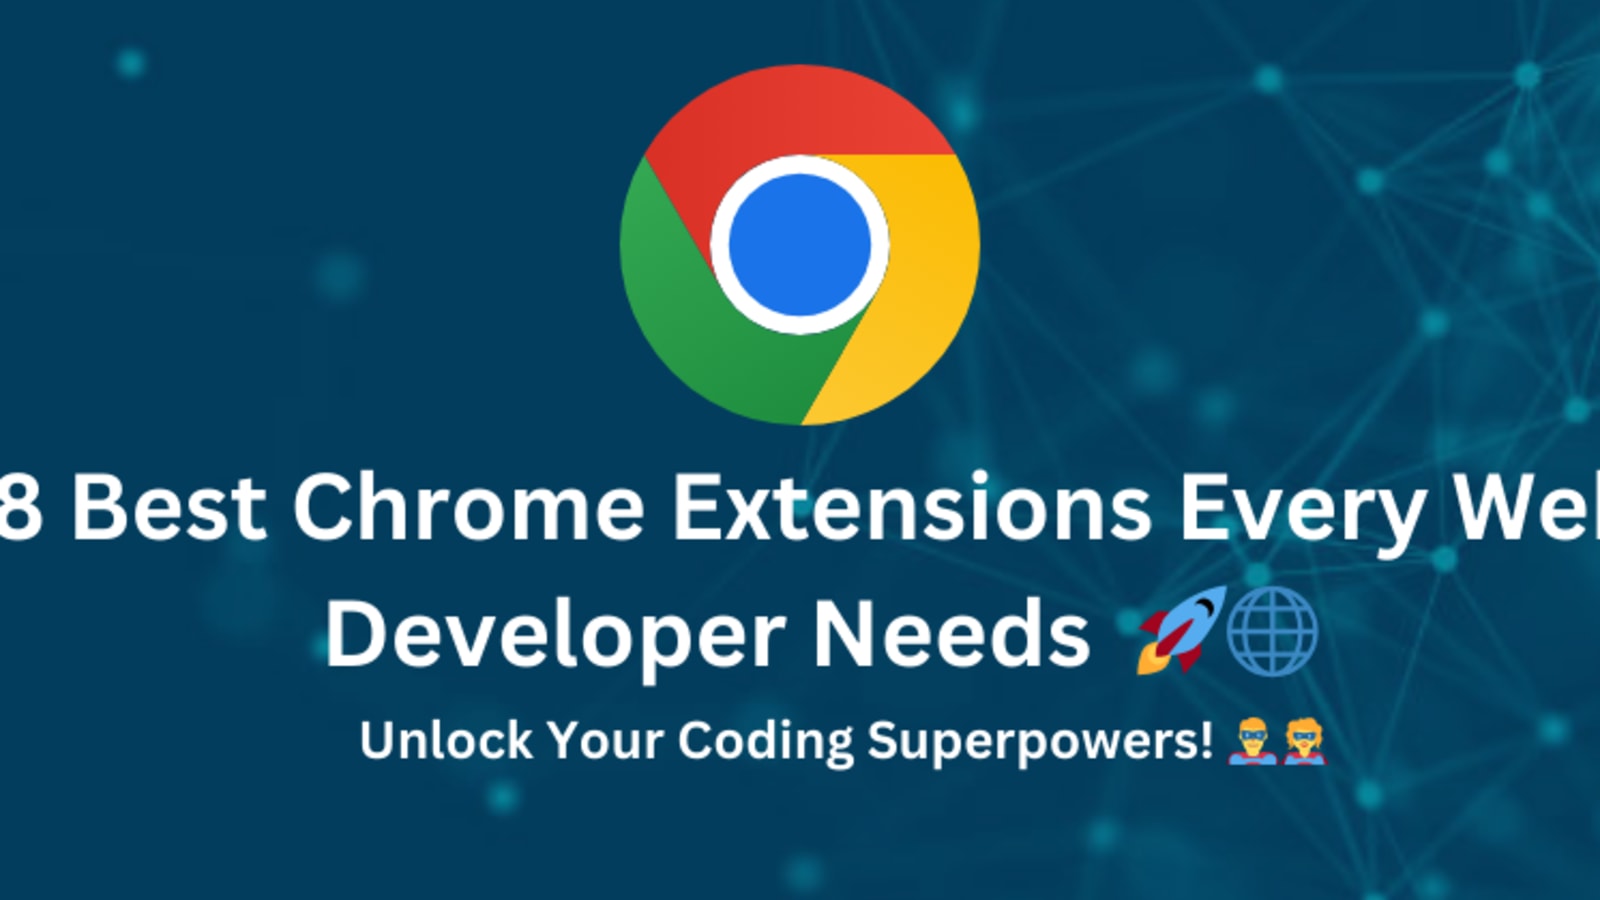 Eight of my favorite Google Chrome extensions